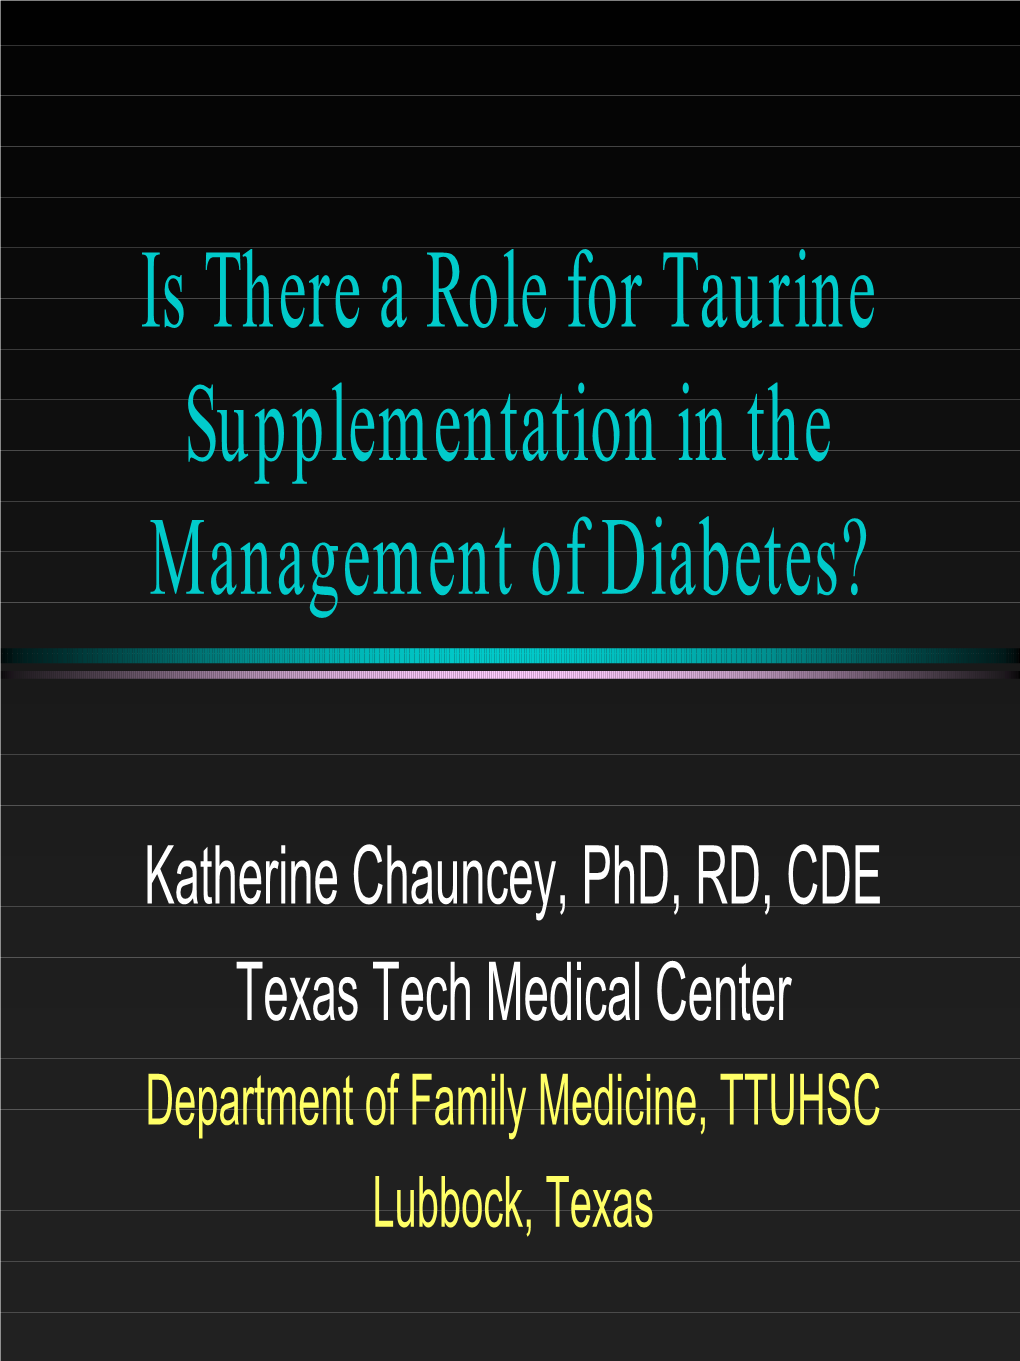 Is There a Role for Taurine Supplementation in the Management of Diabetes?